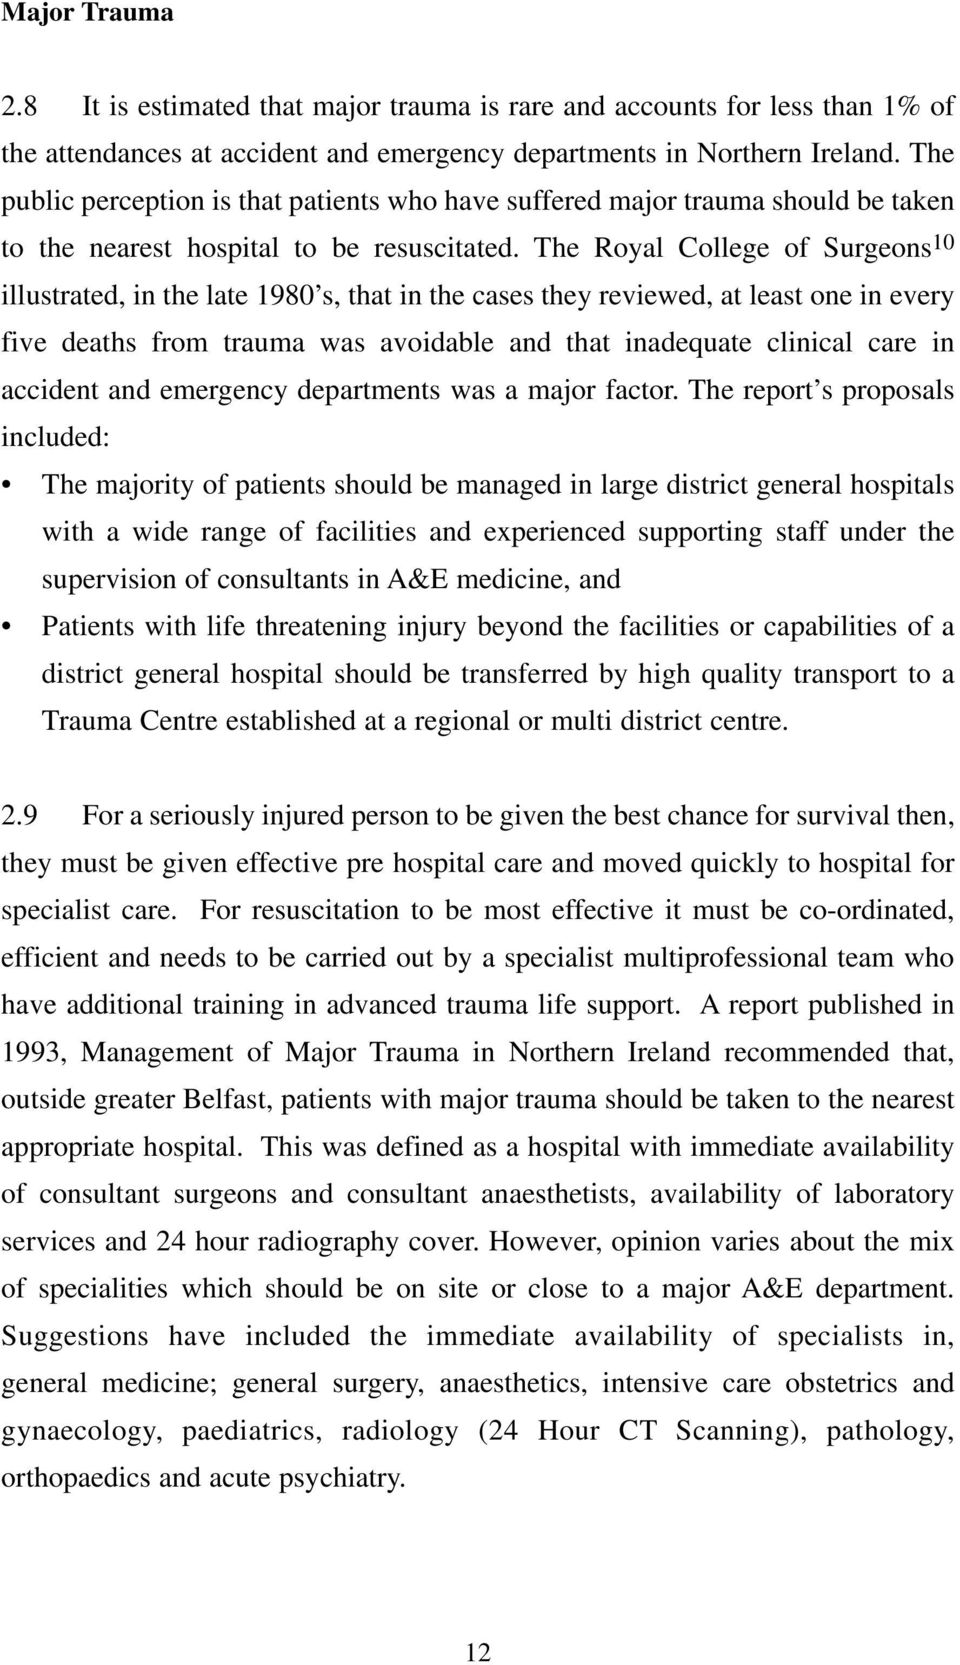 The Royal College of Surgeons 10 illustrated, in the late 1980 s, that in the cases they reviewed, at least one in every five deaths from trauma was avoidable and that inadequate clinical care in